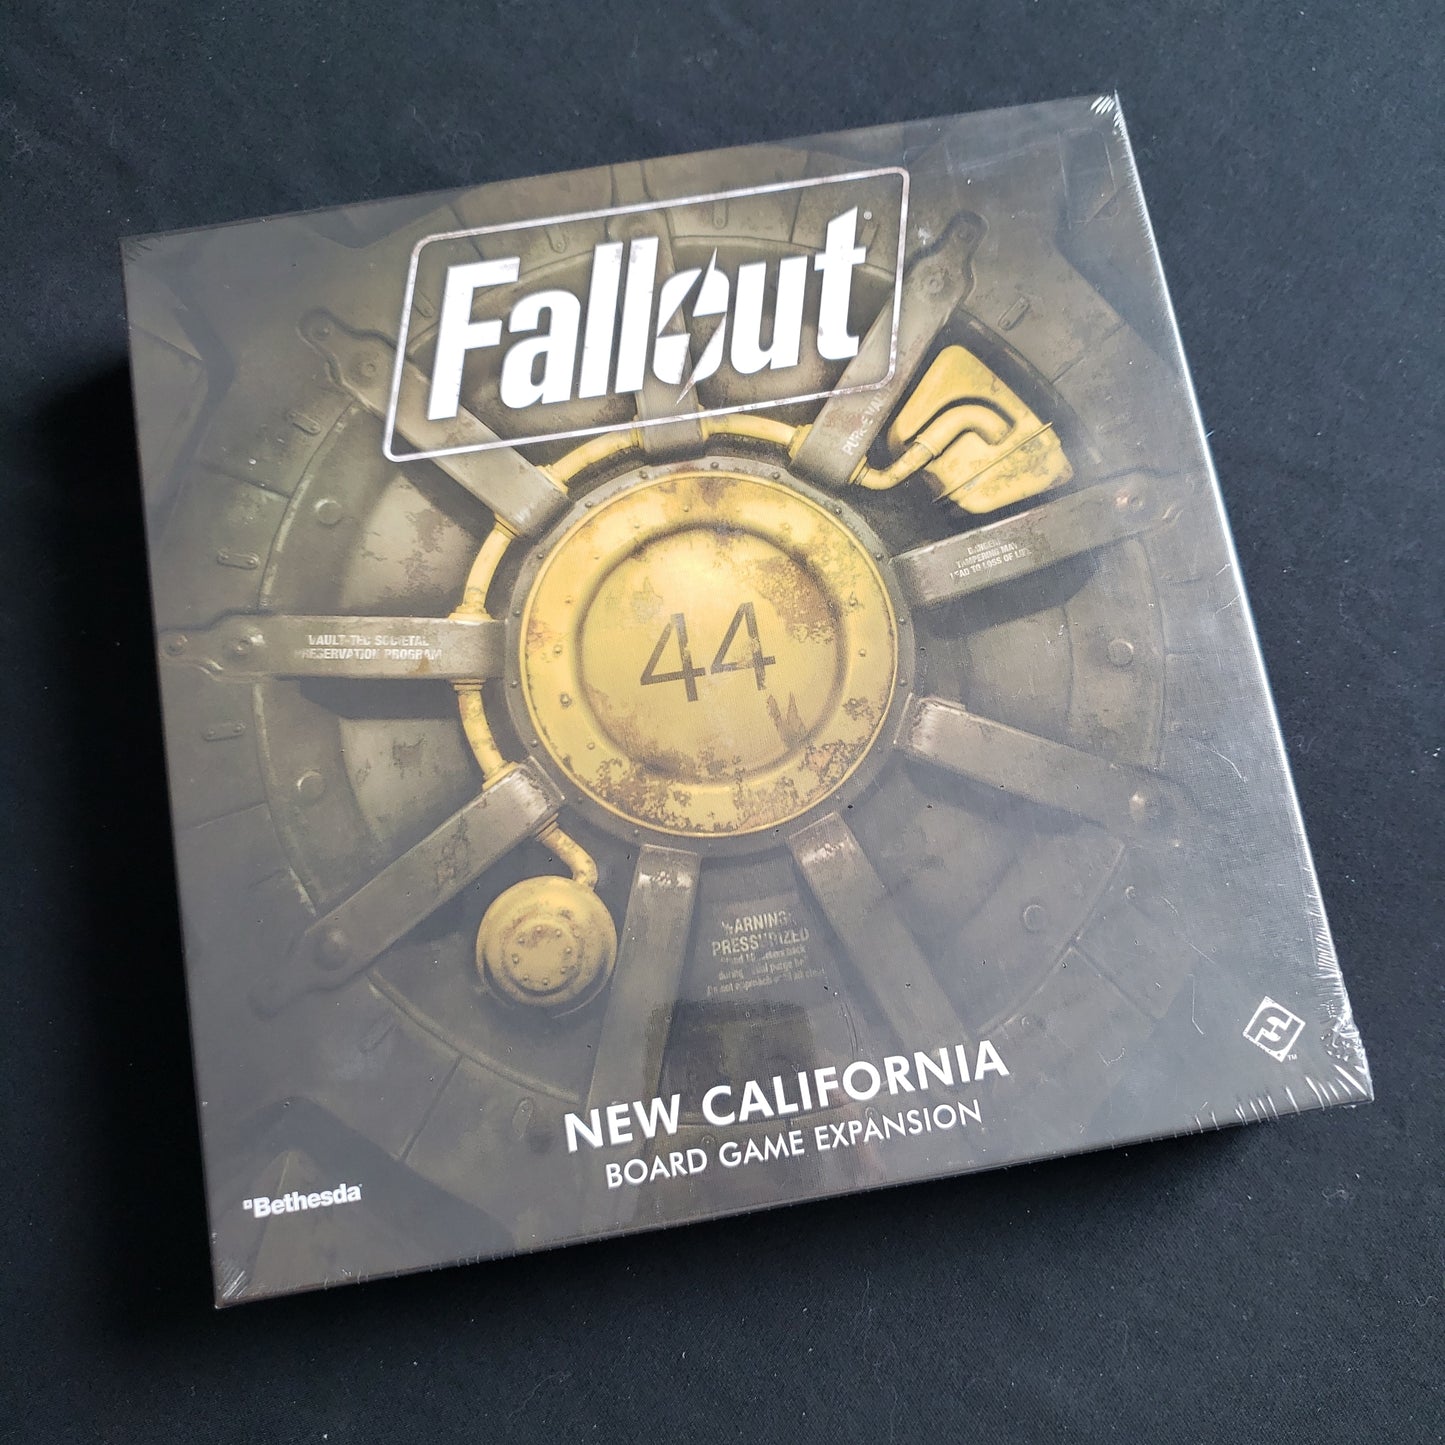 Image shows the front cover of the box of the New California expansion for the Fallout board game